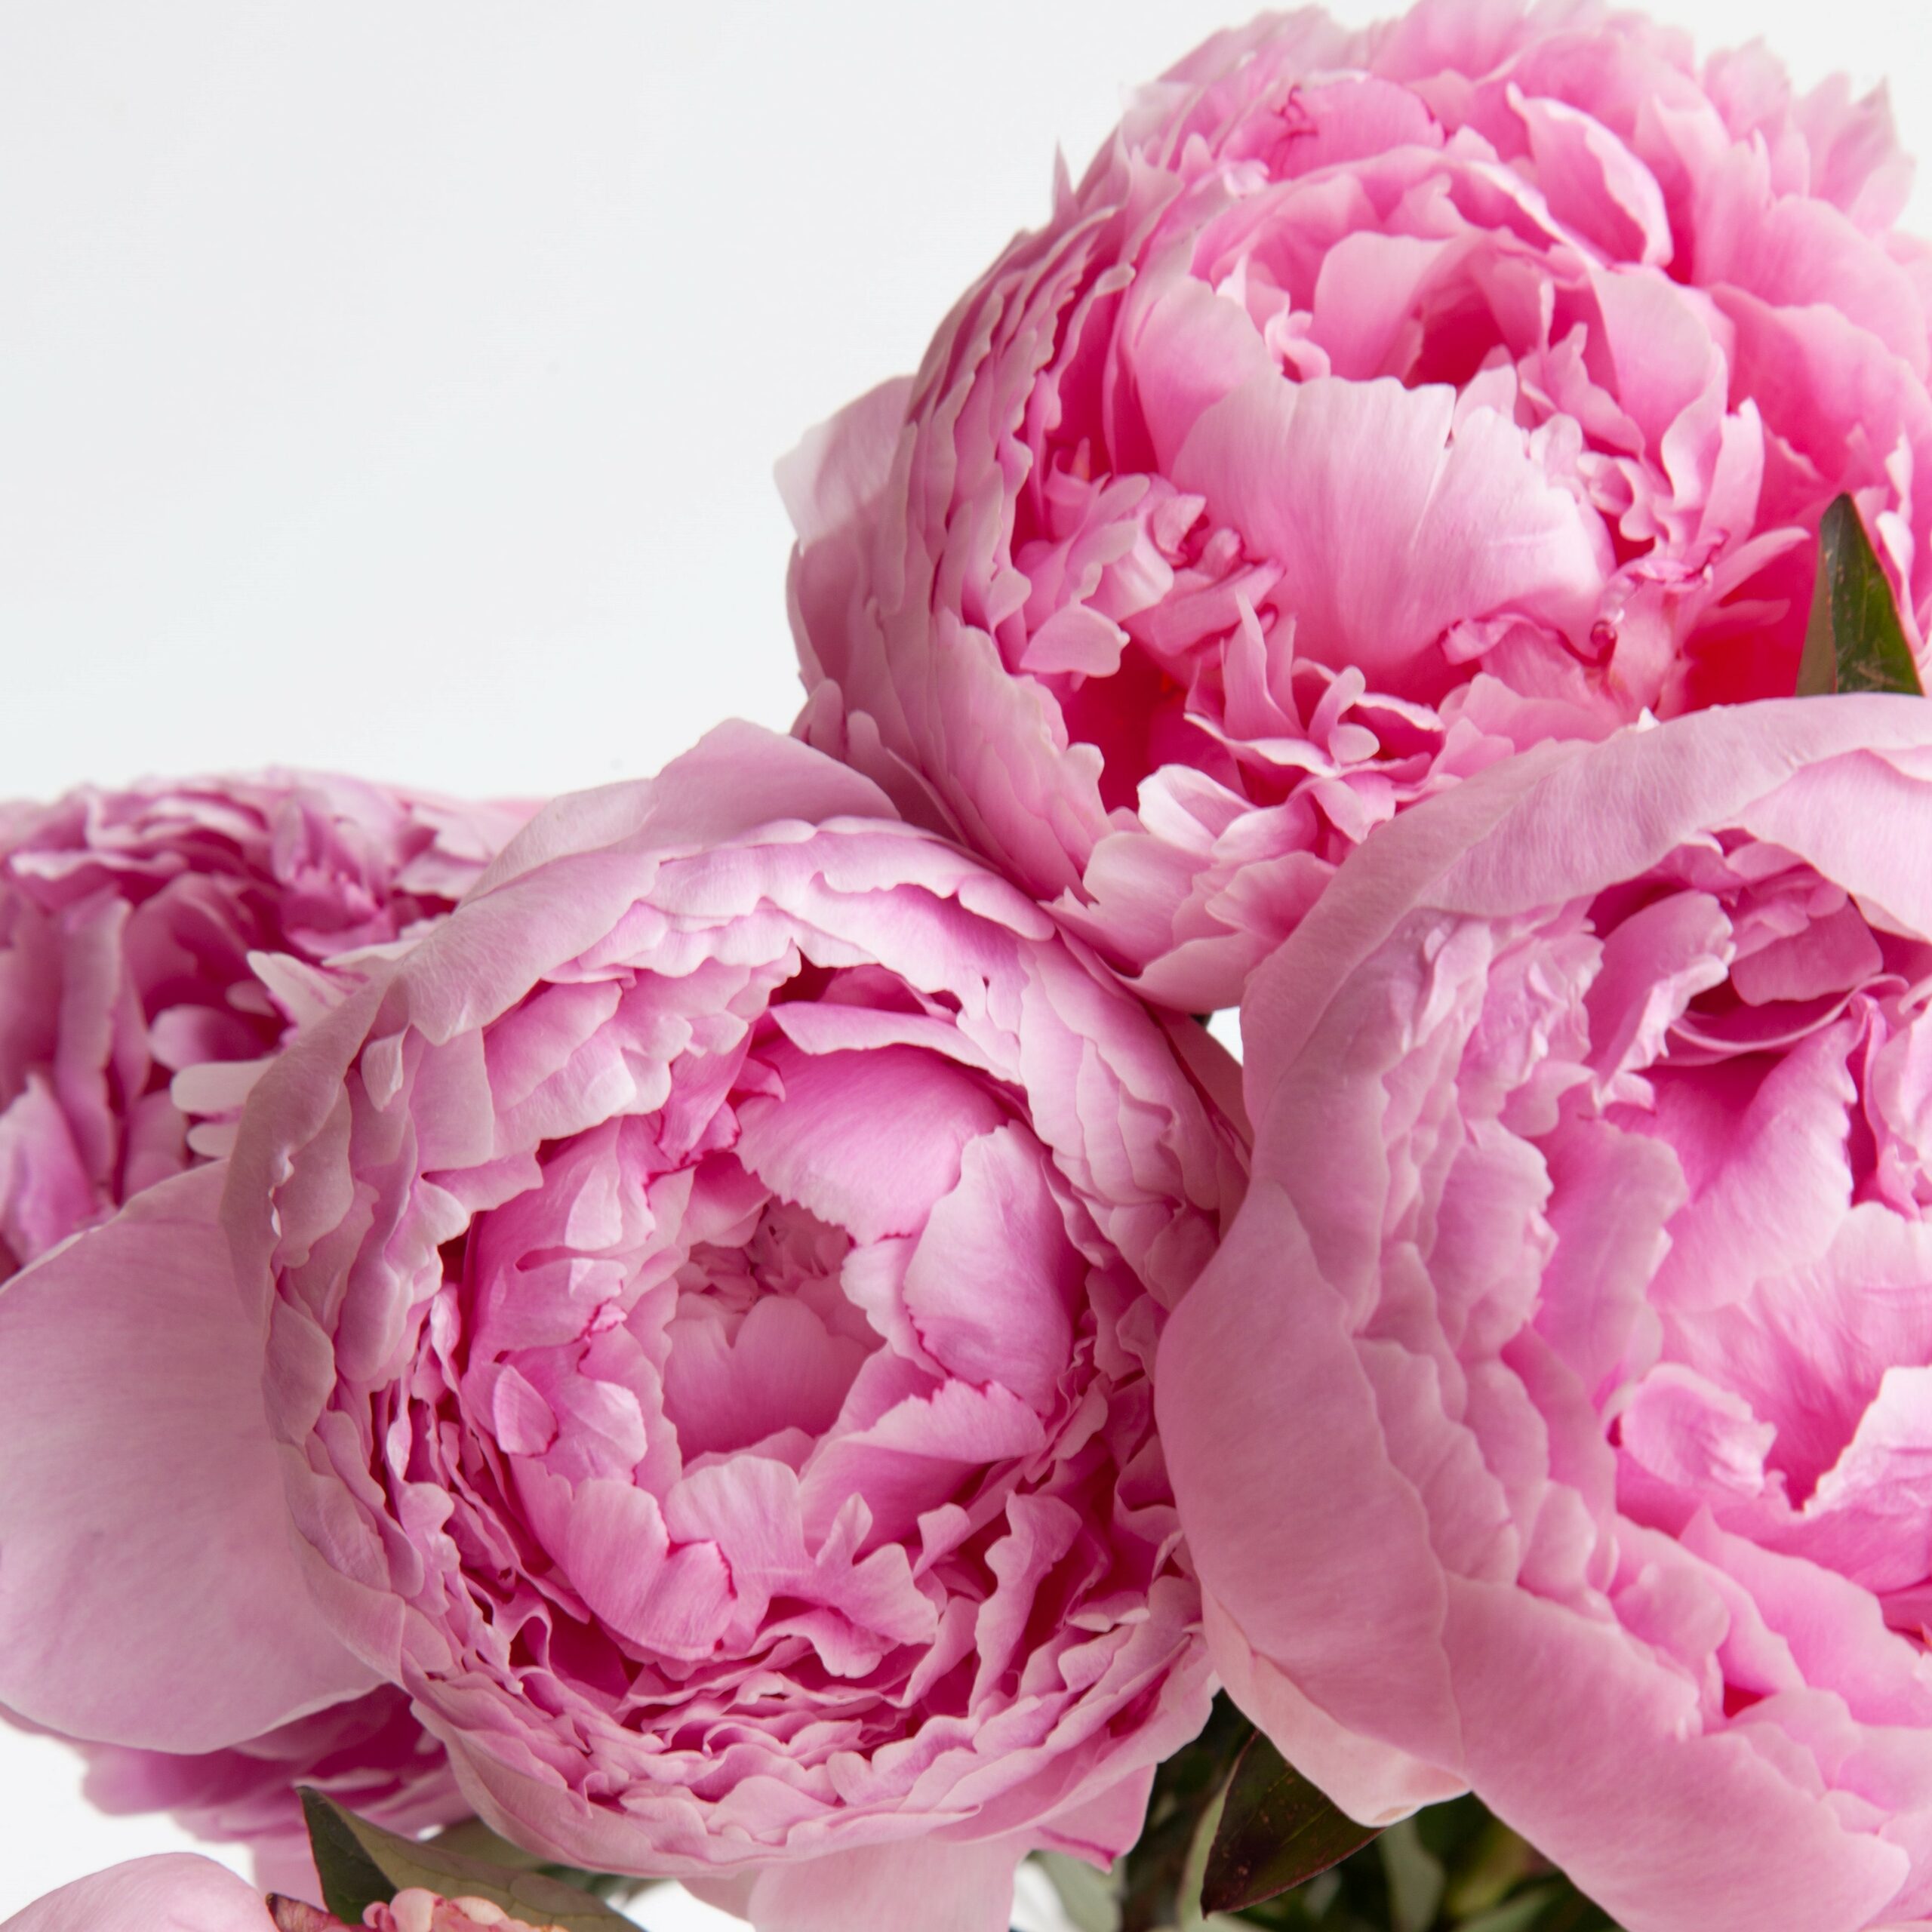 https://www.candlecreations.co.nz/wp-content/uploads/2016/08/Pink-Peony-Fragrance-Oil-scaled.jpg